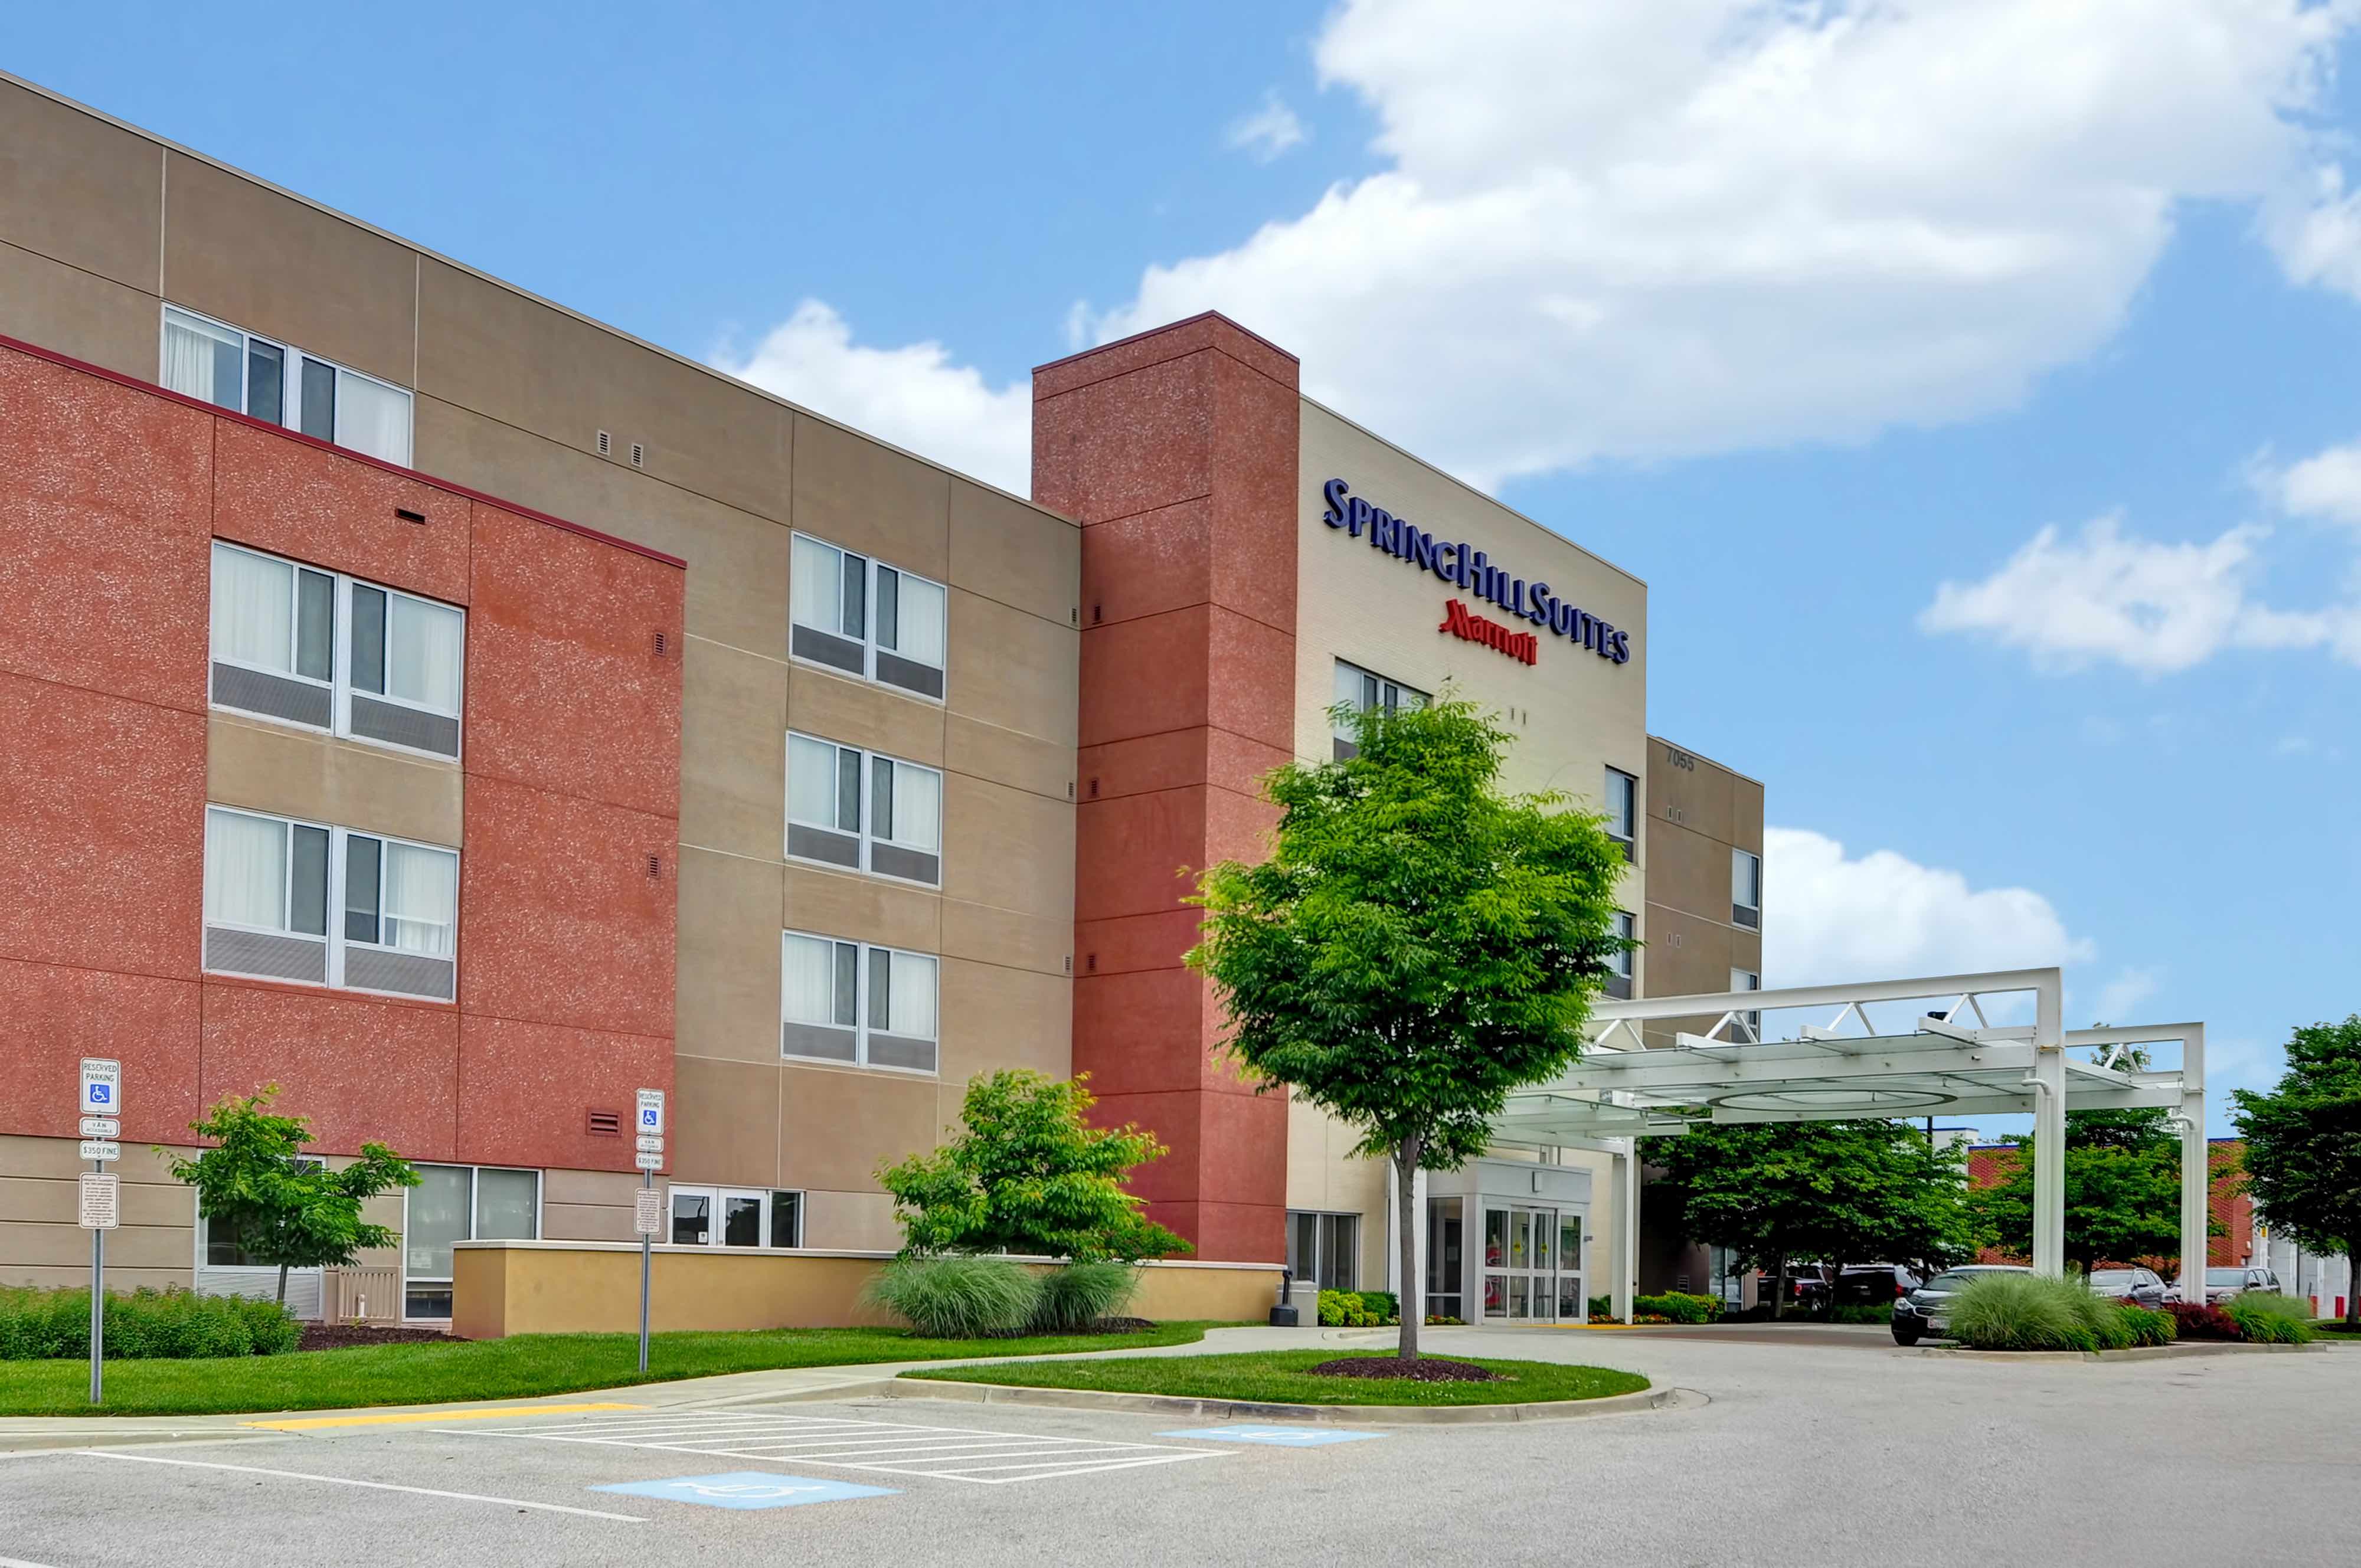 The company acquired the 124-room Hampton Inn  Suites by Hilton and the four-story 117-room Springhill Suites by Marriott